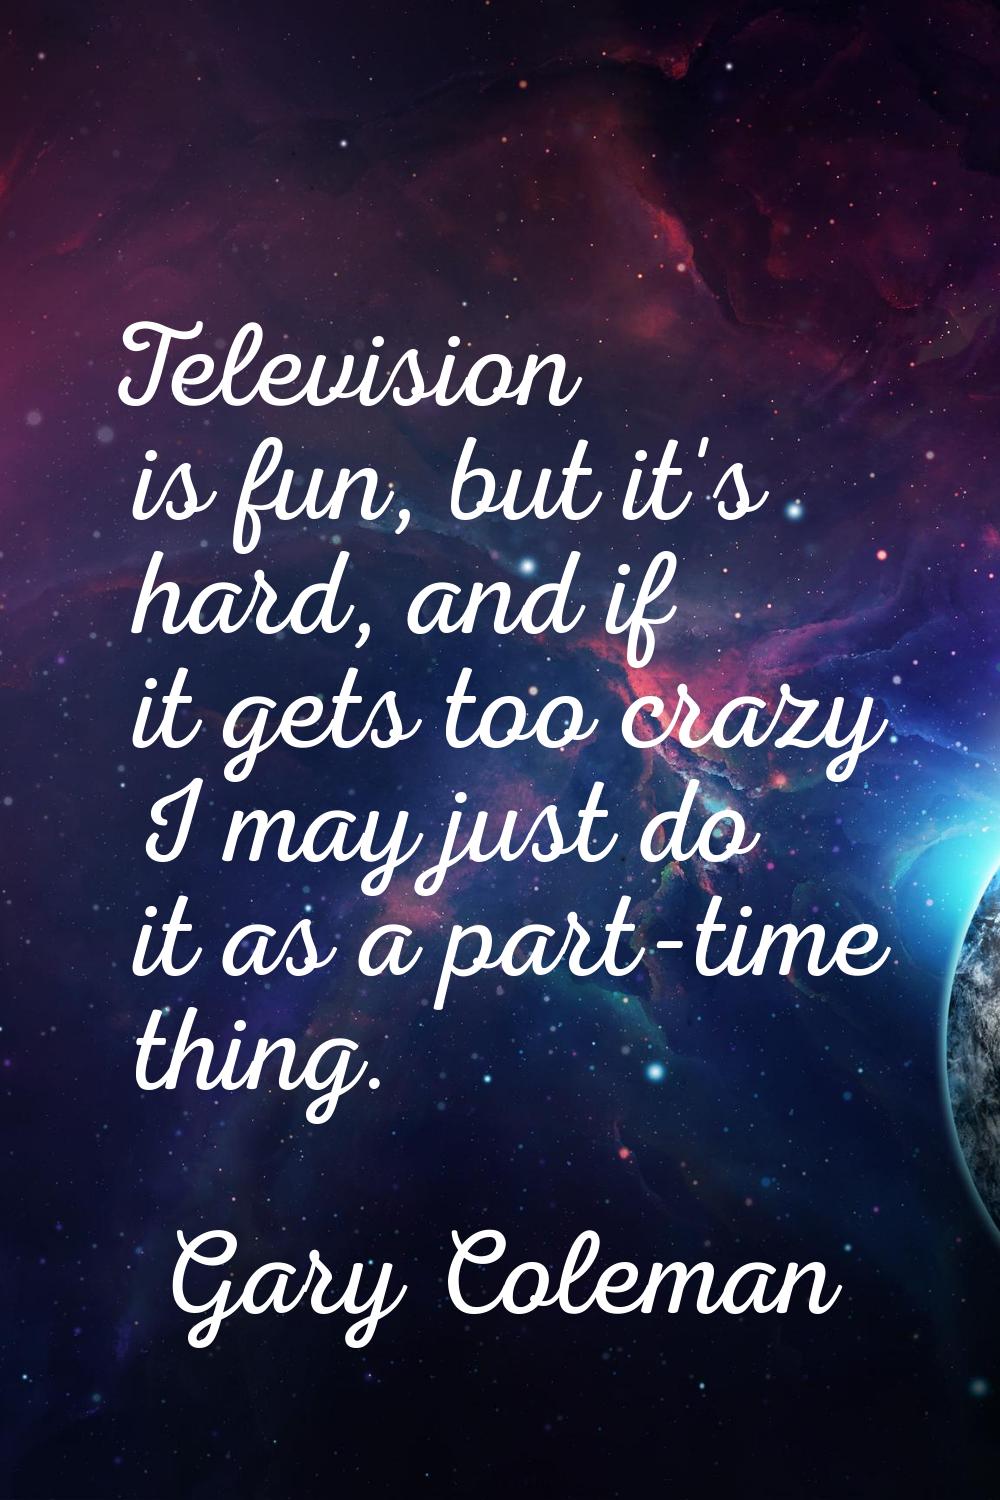 Television is fun, but it's hard, and if it gets too crazy I may just do it as a part-time thing.